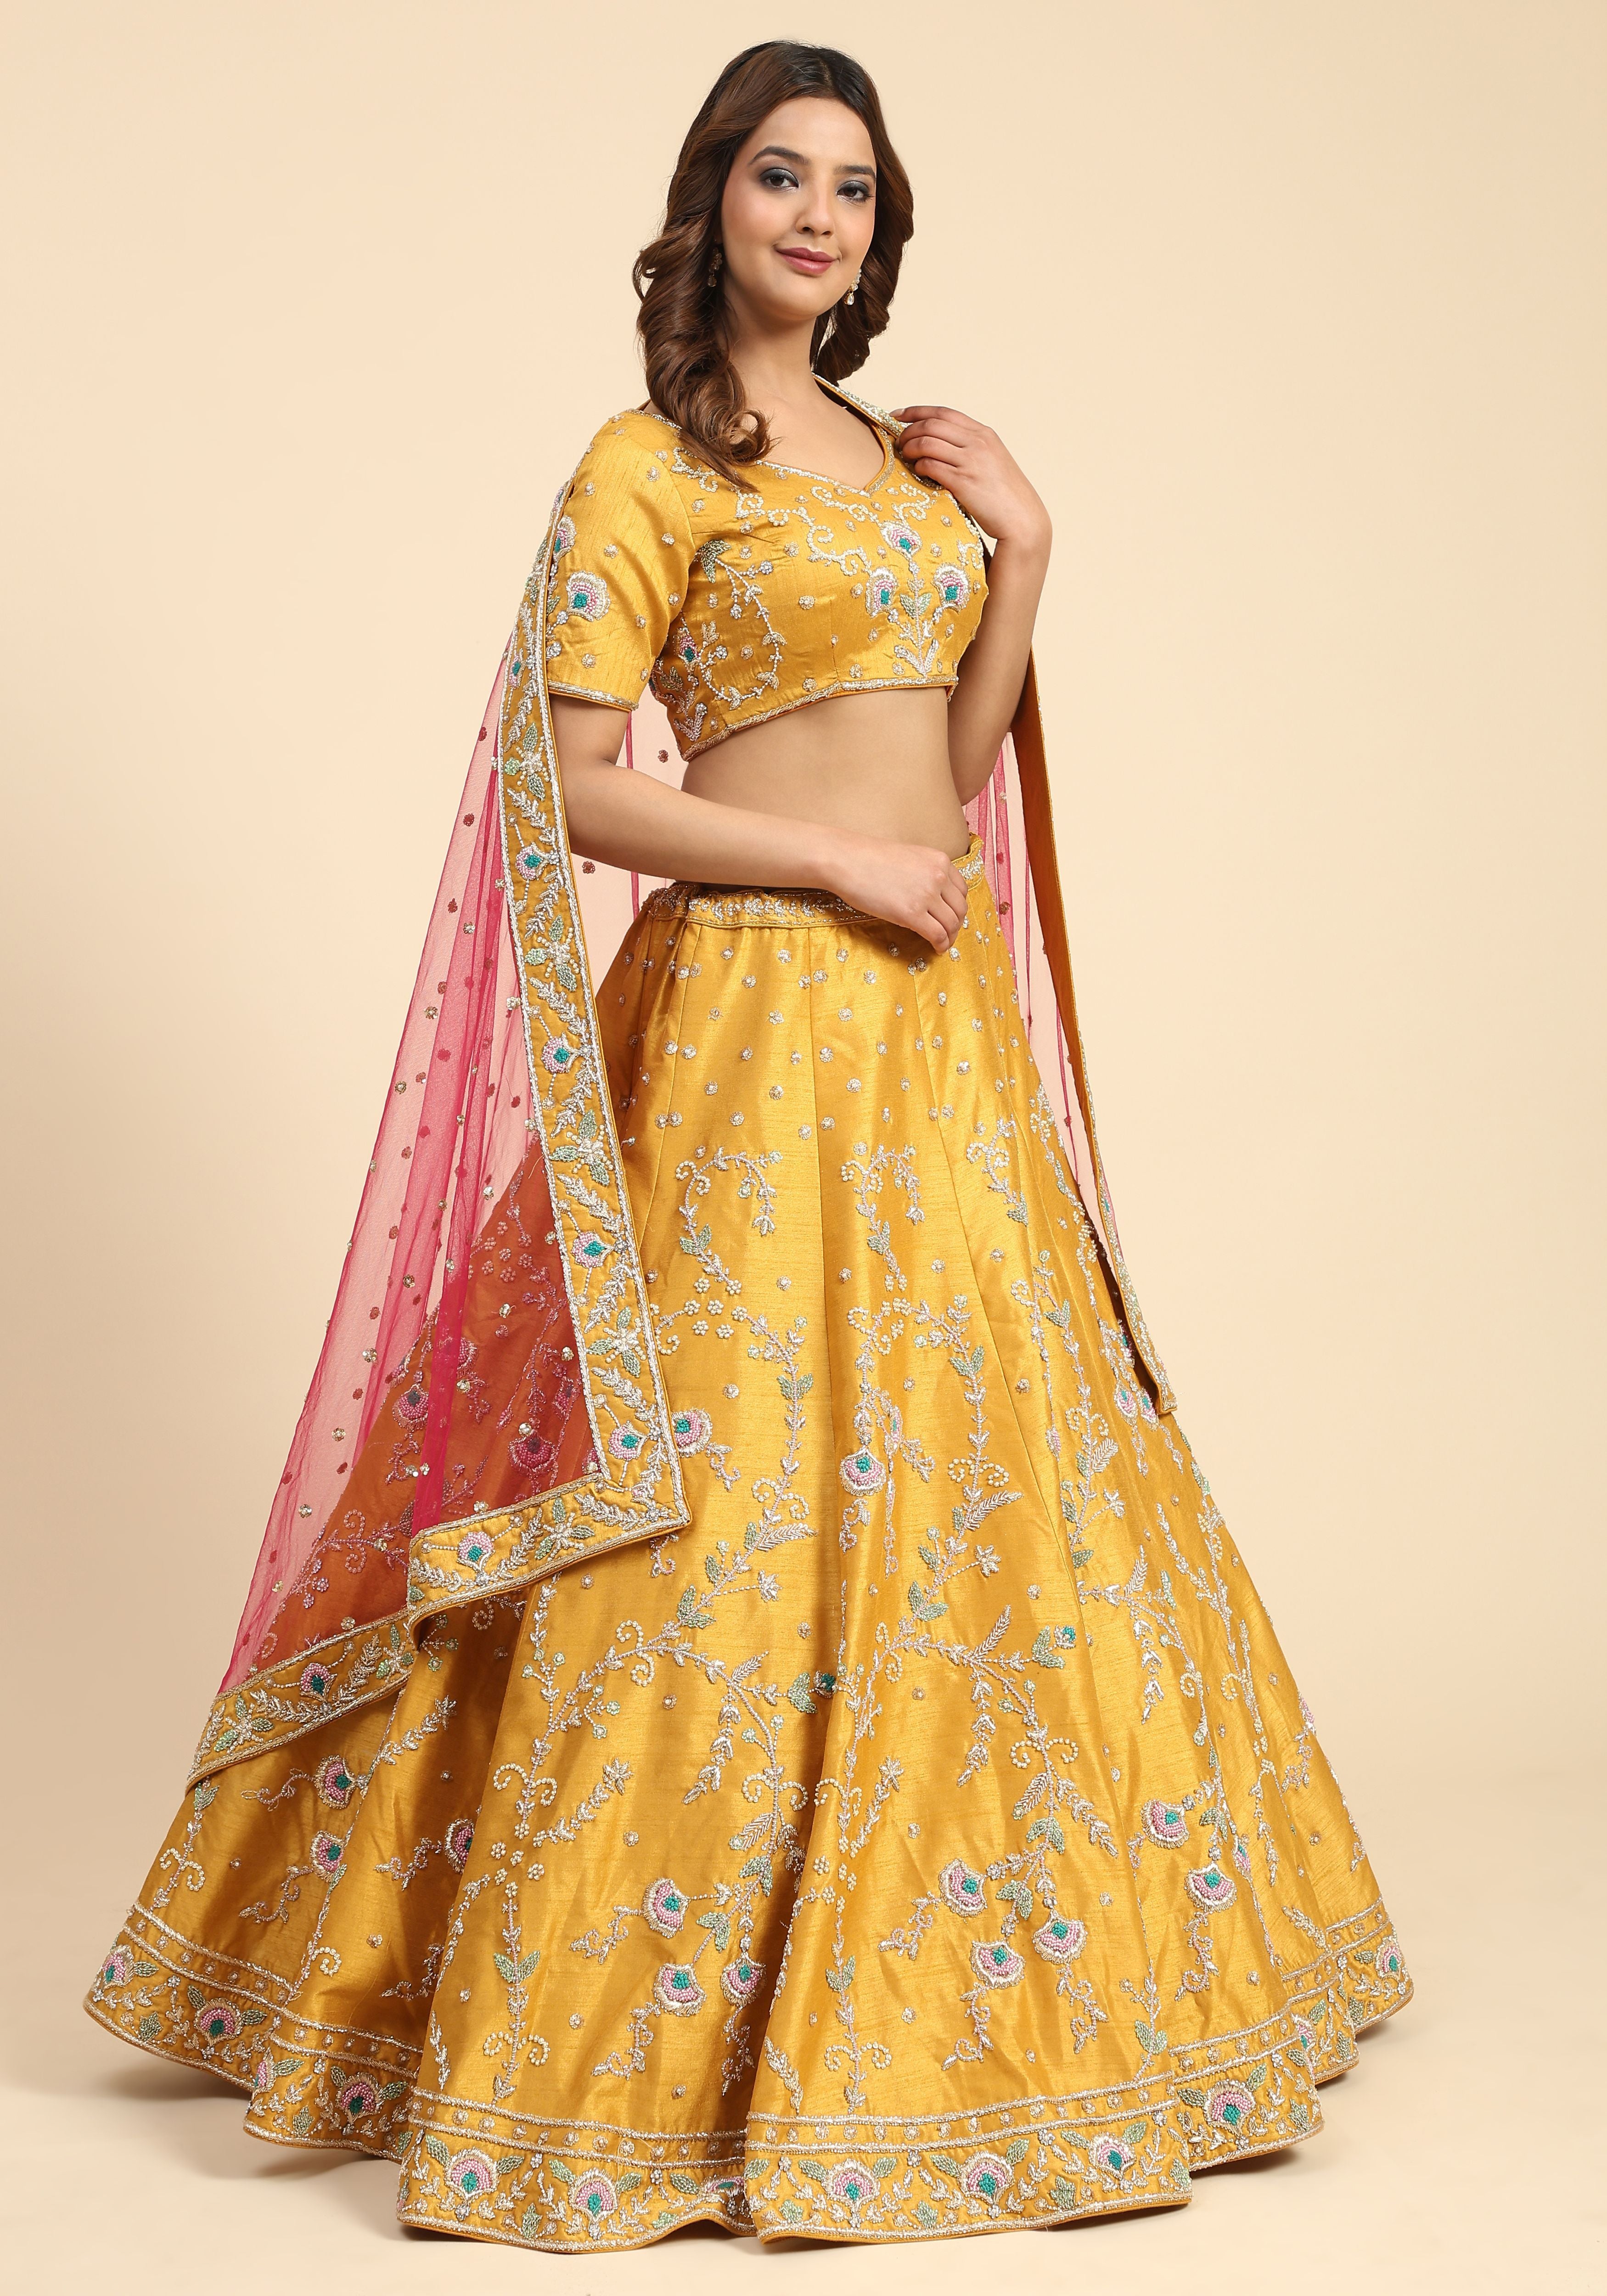 Women's Embroidered Lahengas For The Discerning Women's Celebration Of Heritage And Style - Phenav